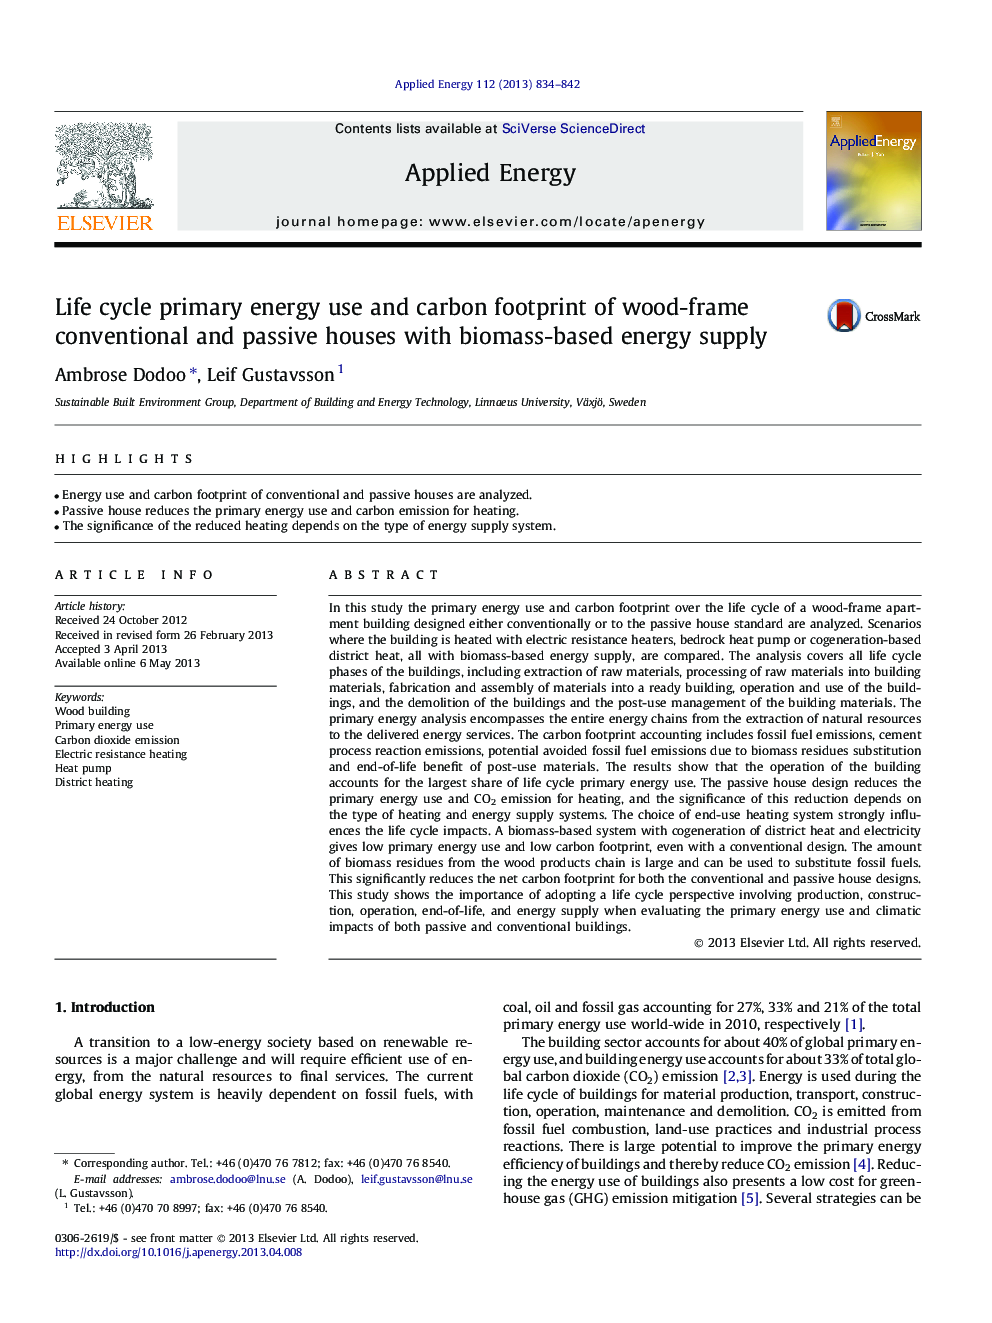 Life cycle primary energy use and carbon footprint of wood-frame conventional and passive houses with biomass-based energy supply